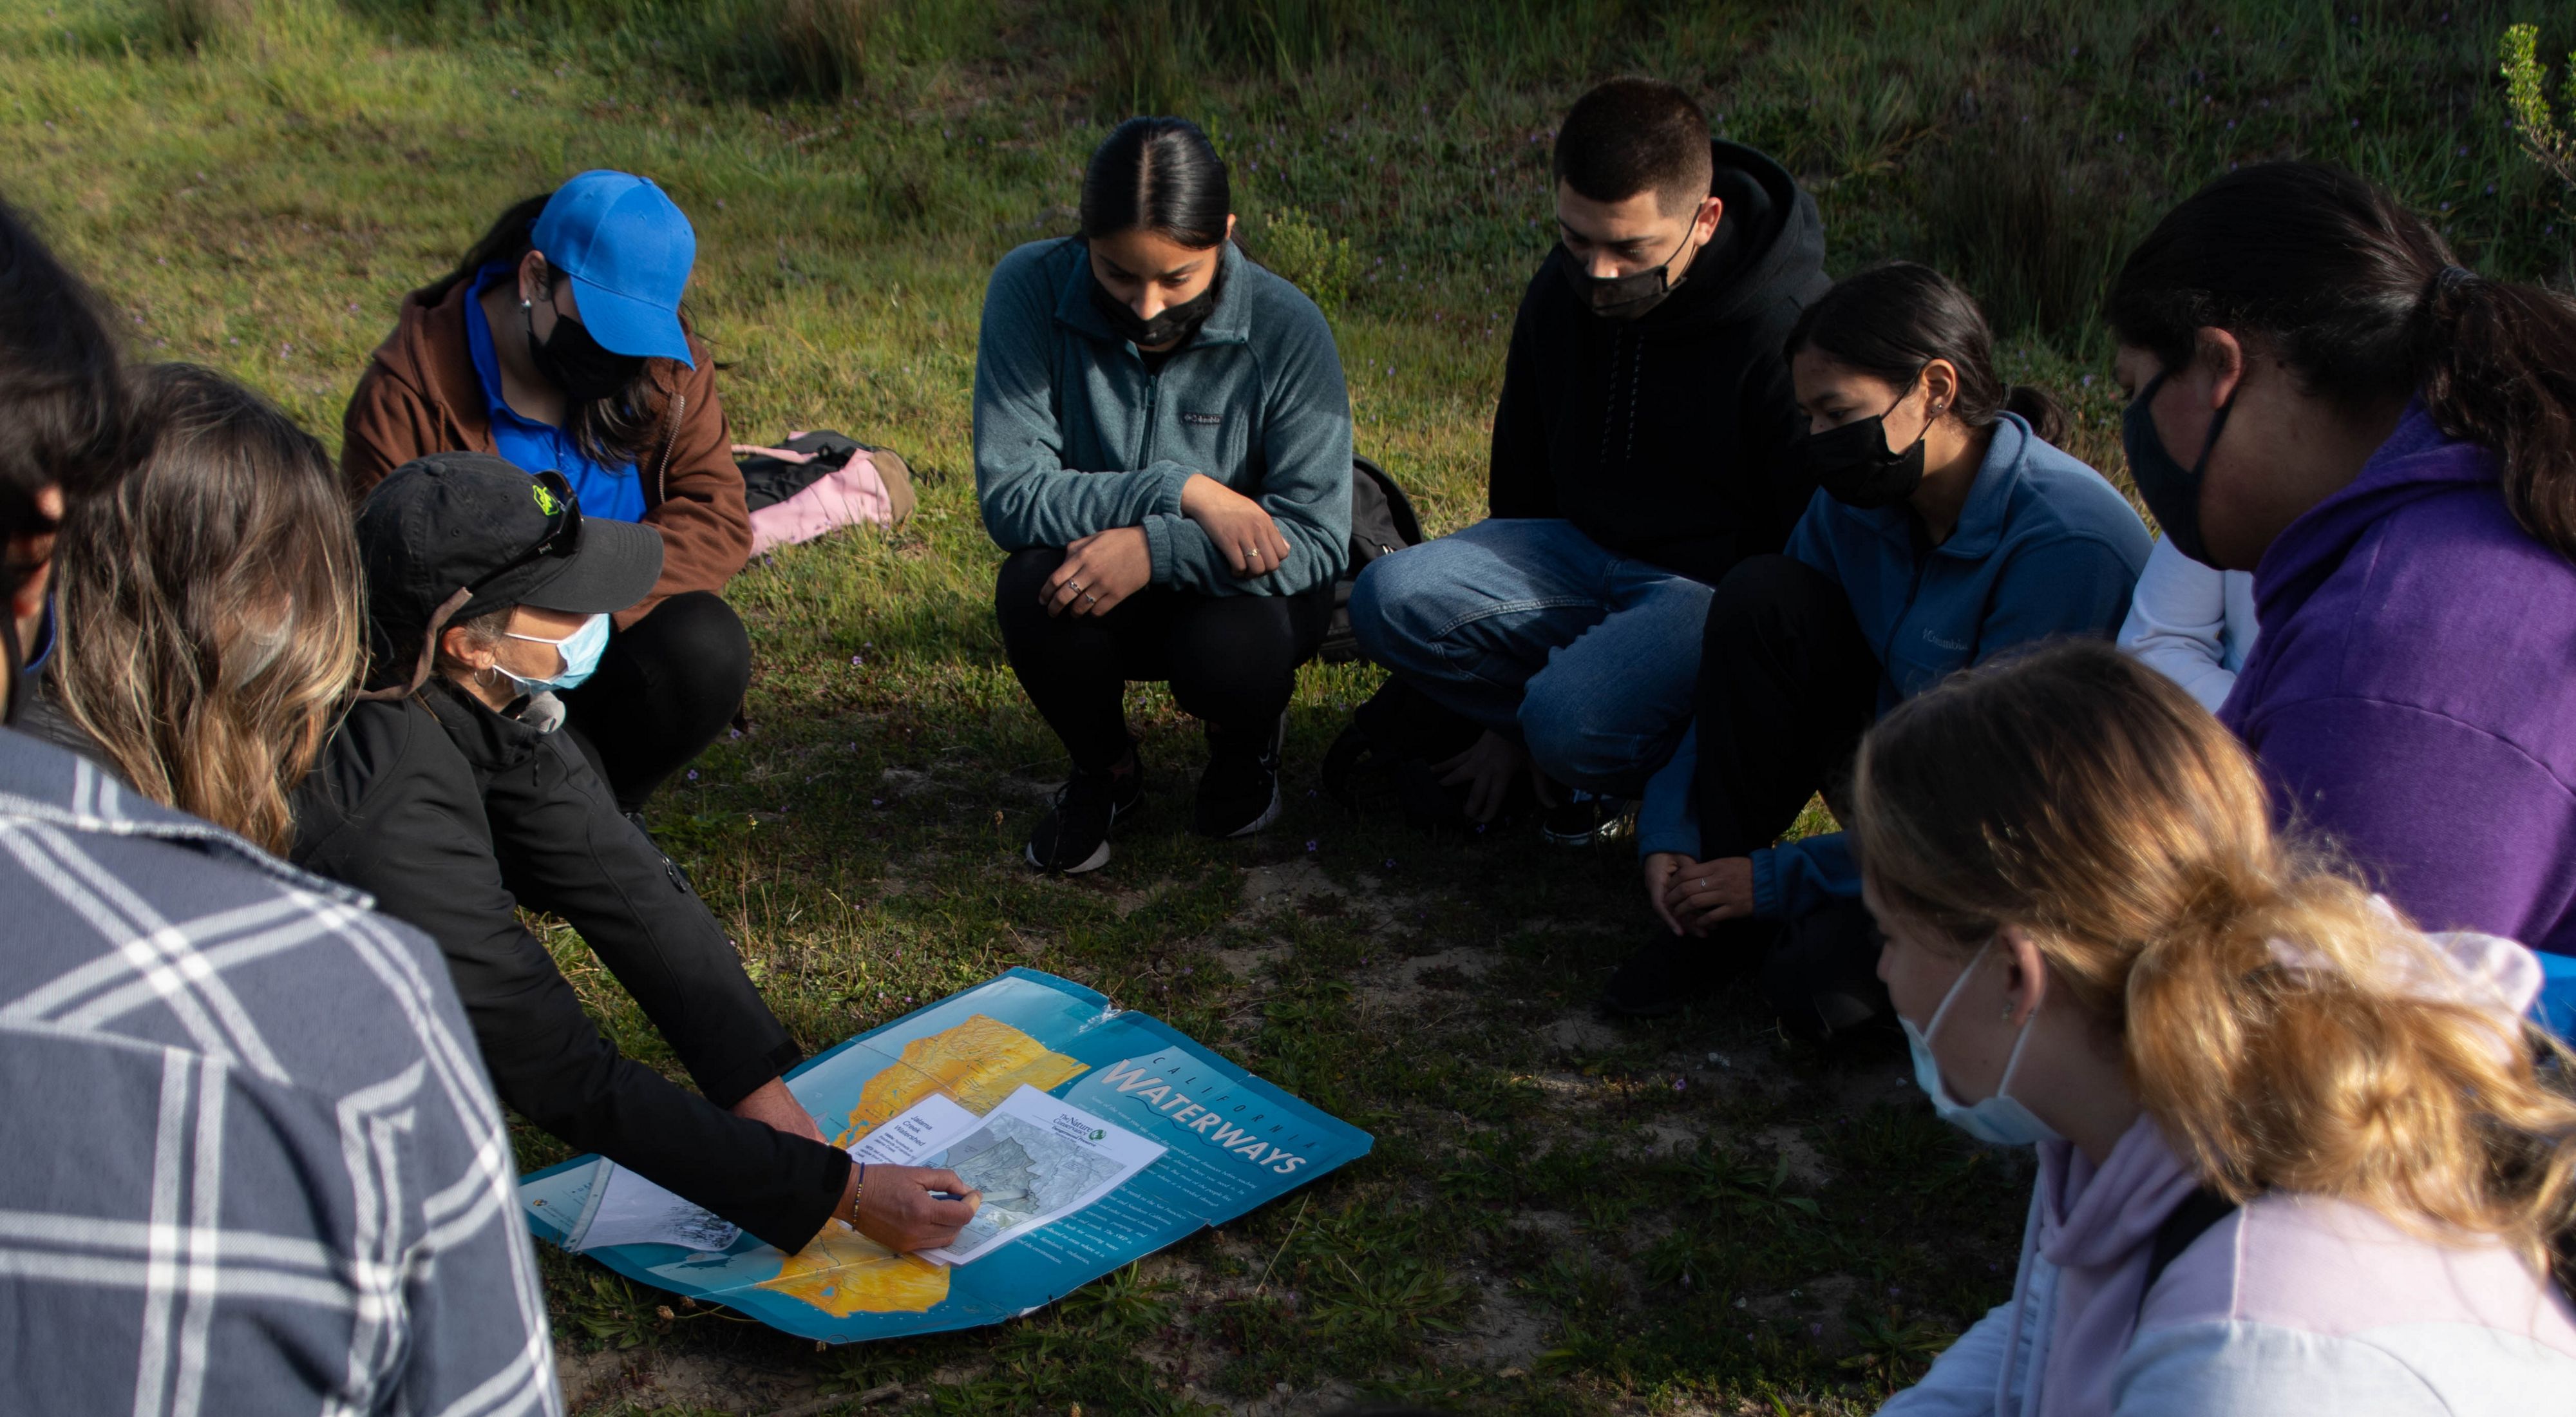 Group of people sitting in a circle in the grass looking down at a map.